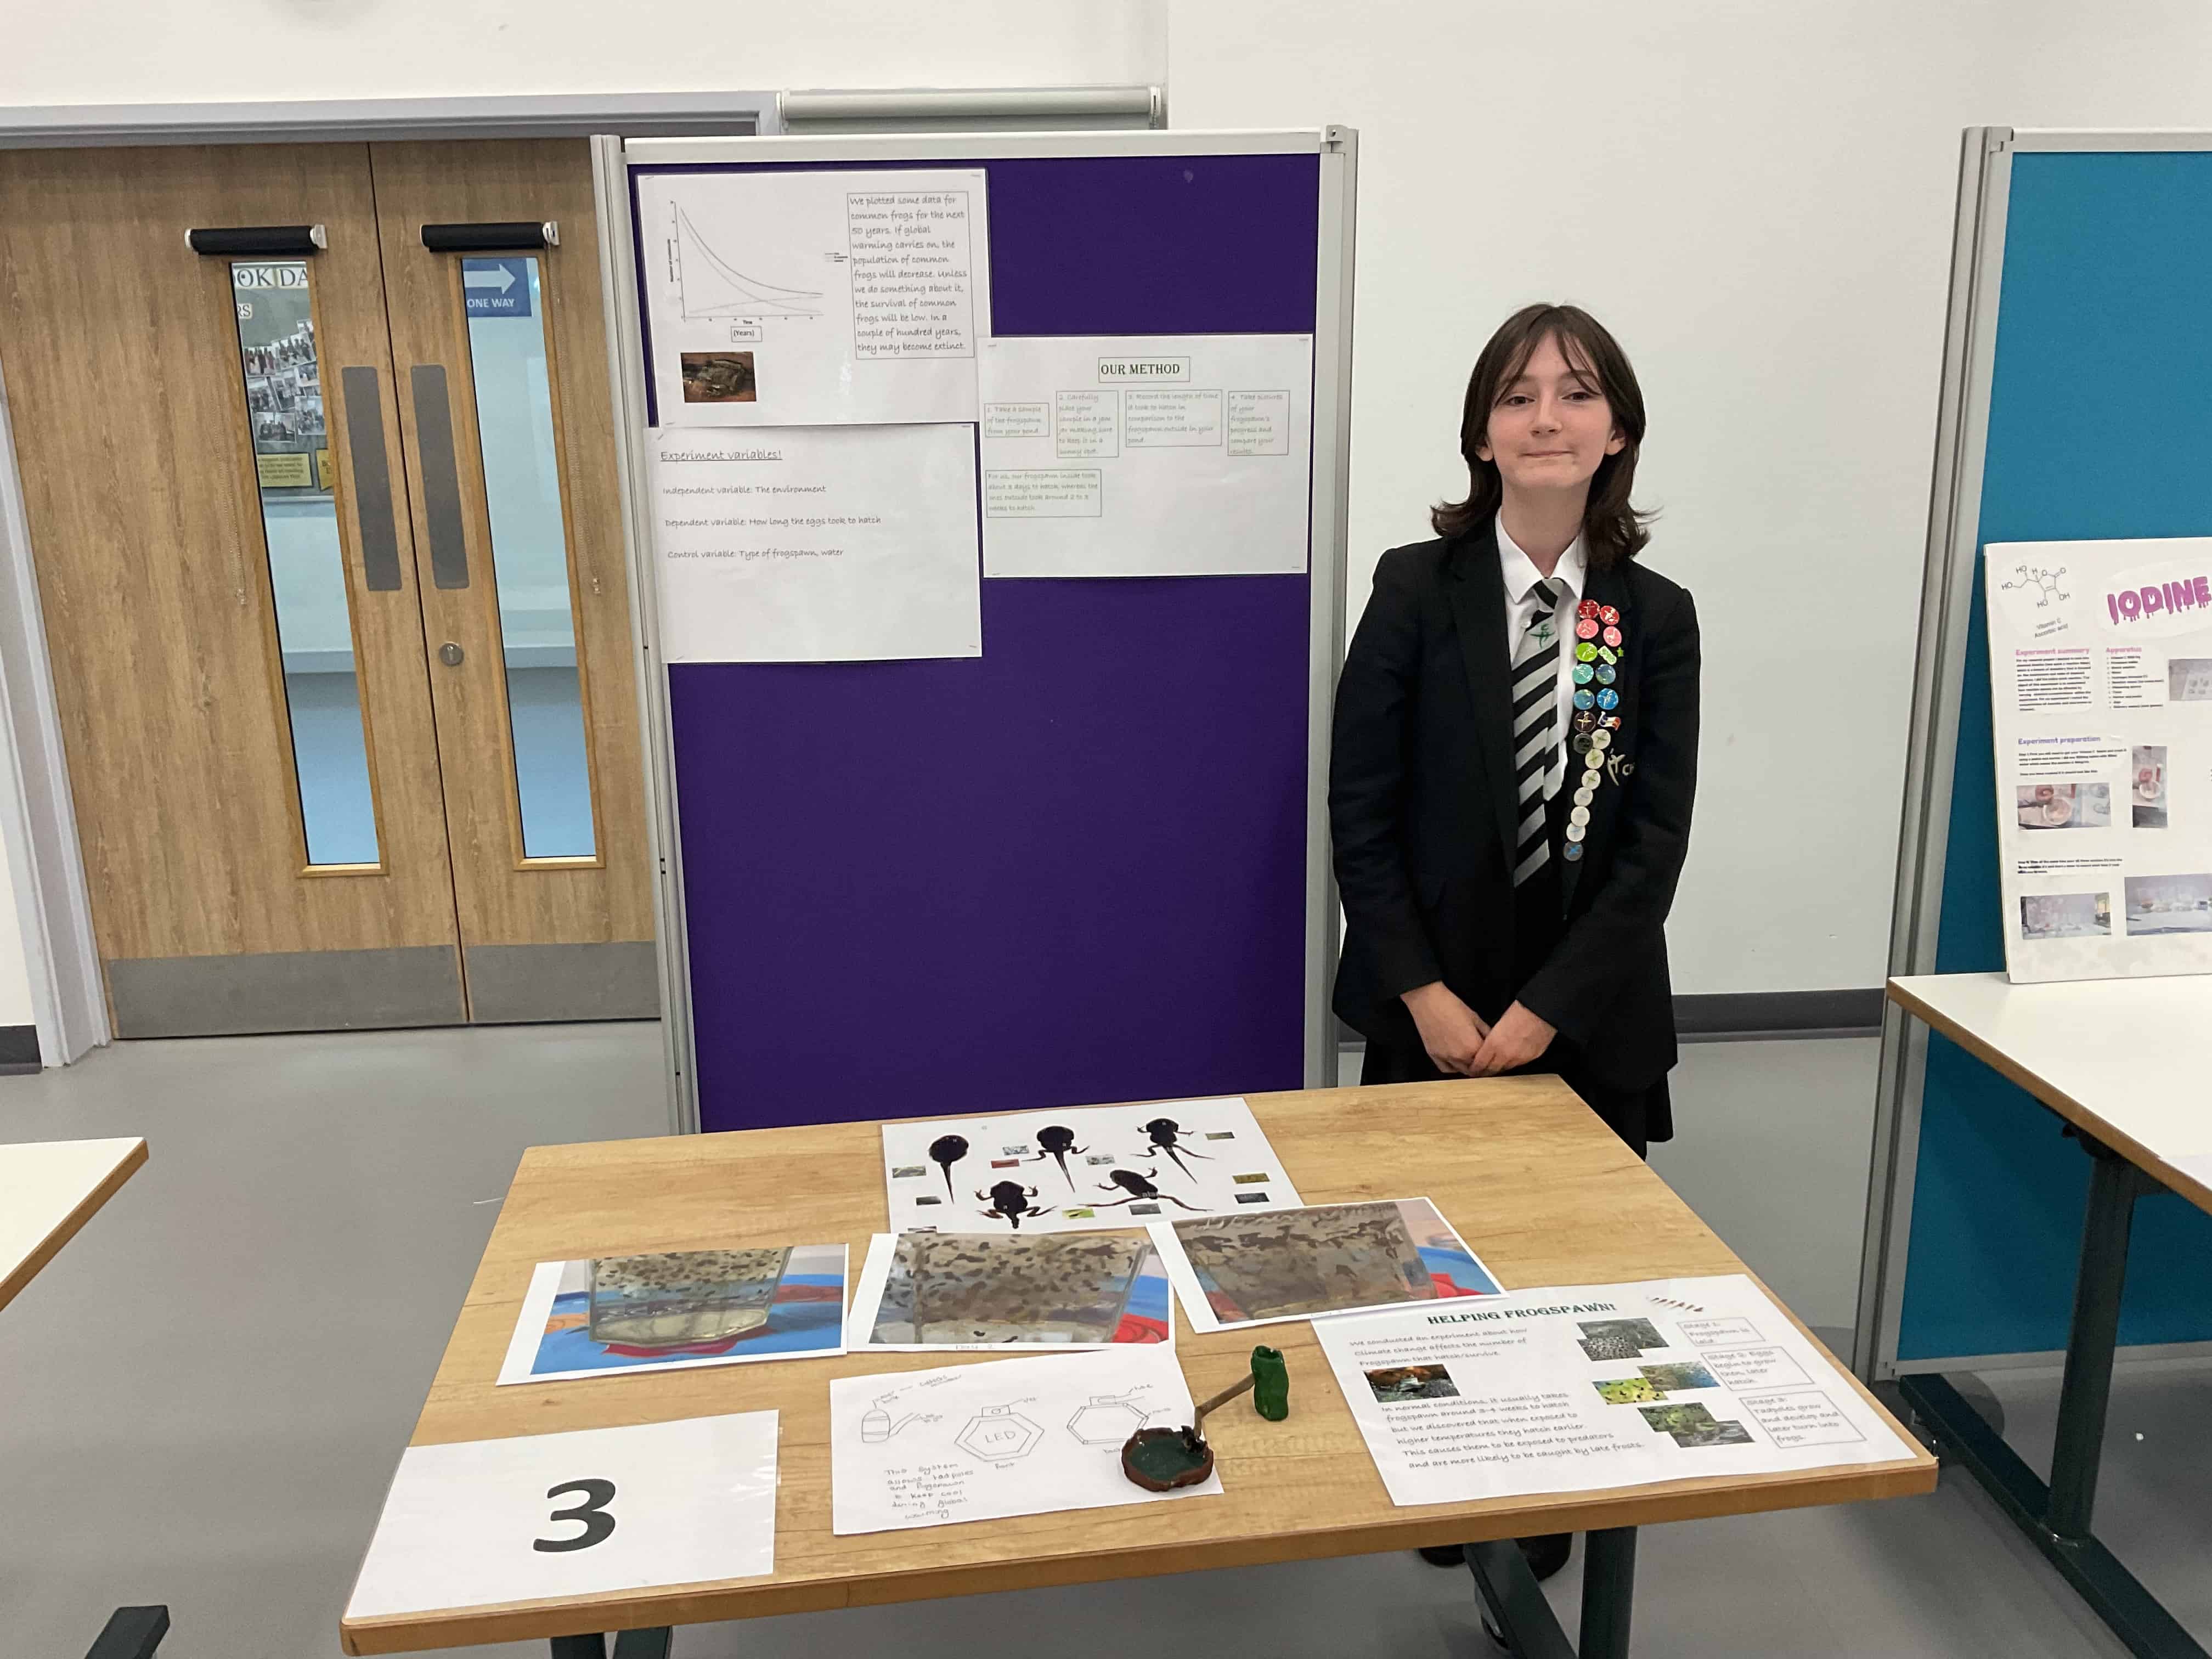 A Cheadle Hulme High School student from Team Frogspawn represents the team of 4 at the Laurus Trust Science Fair as she smiles in front of their project at Laurus Cheadle Hulme.